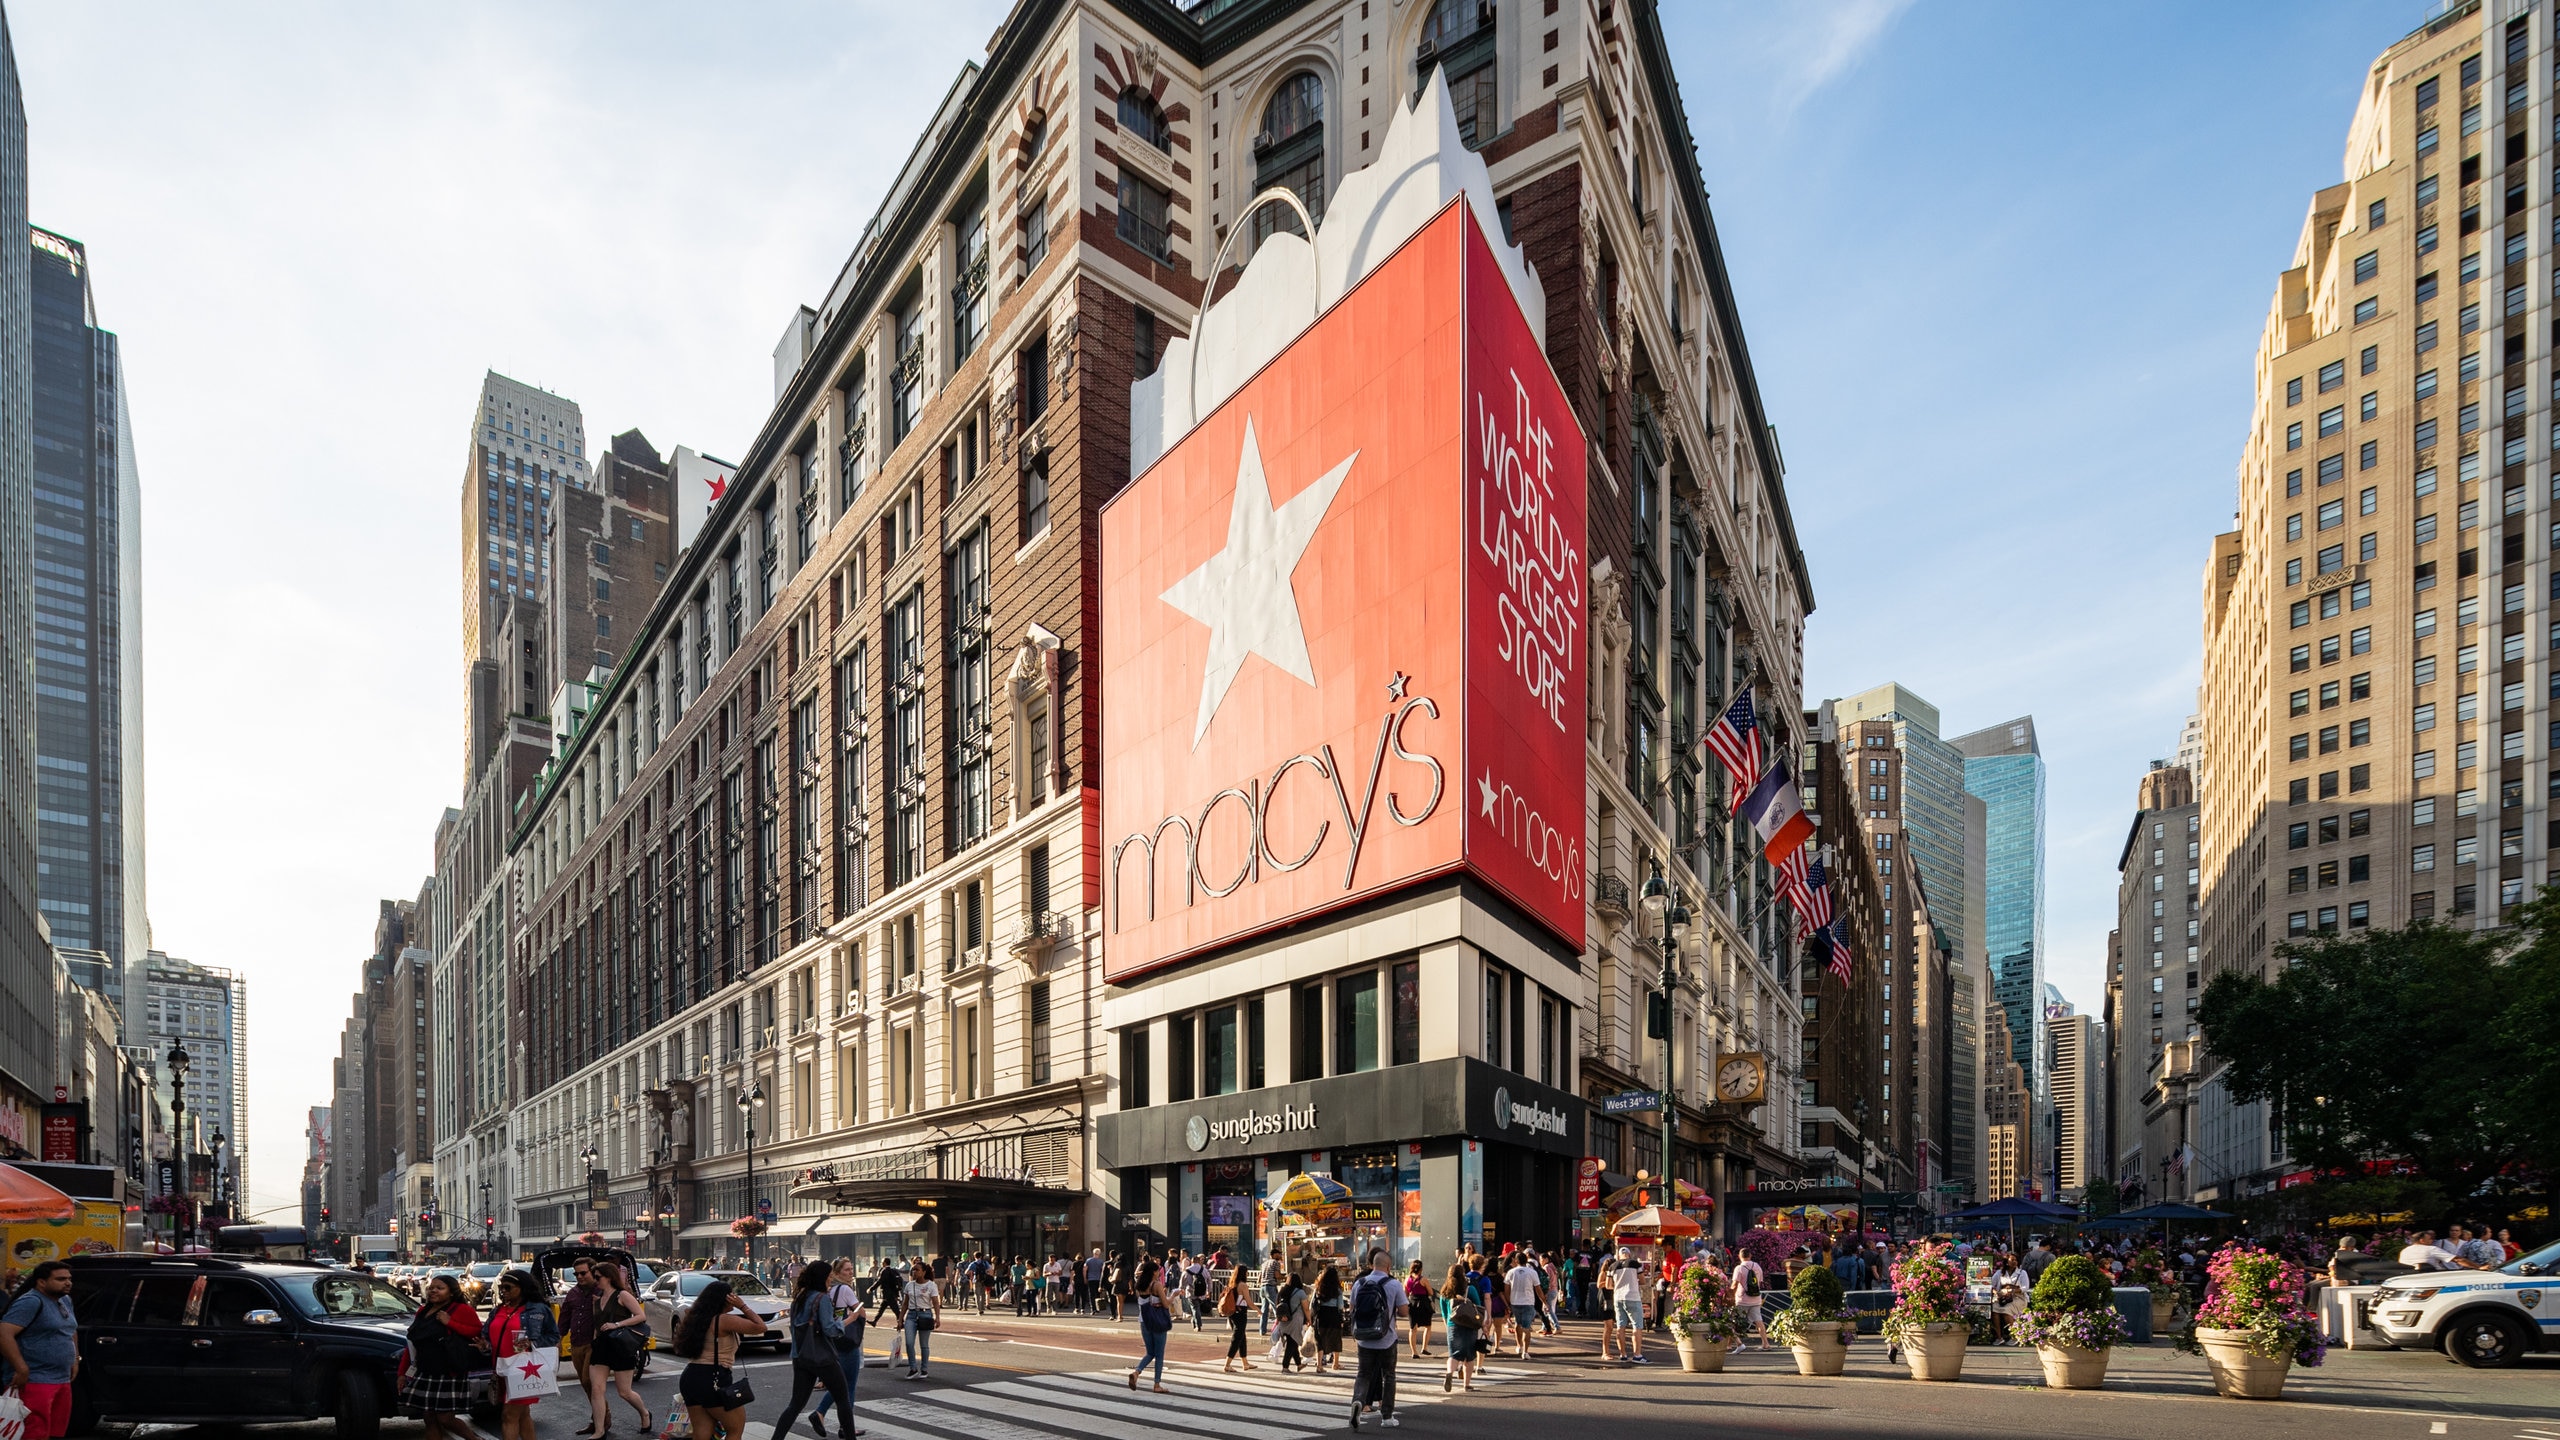 Macy's Department Store - 151 West 34th Street, New York, US